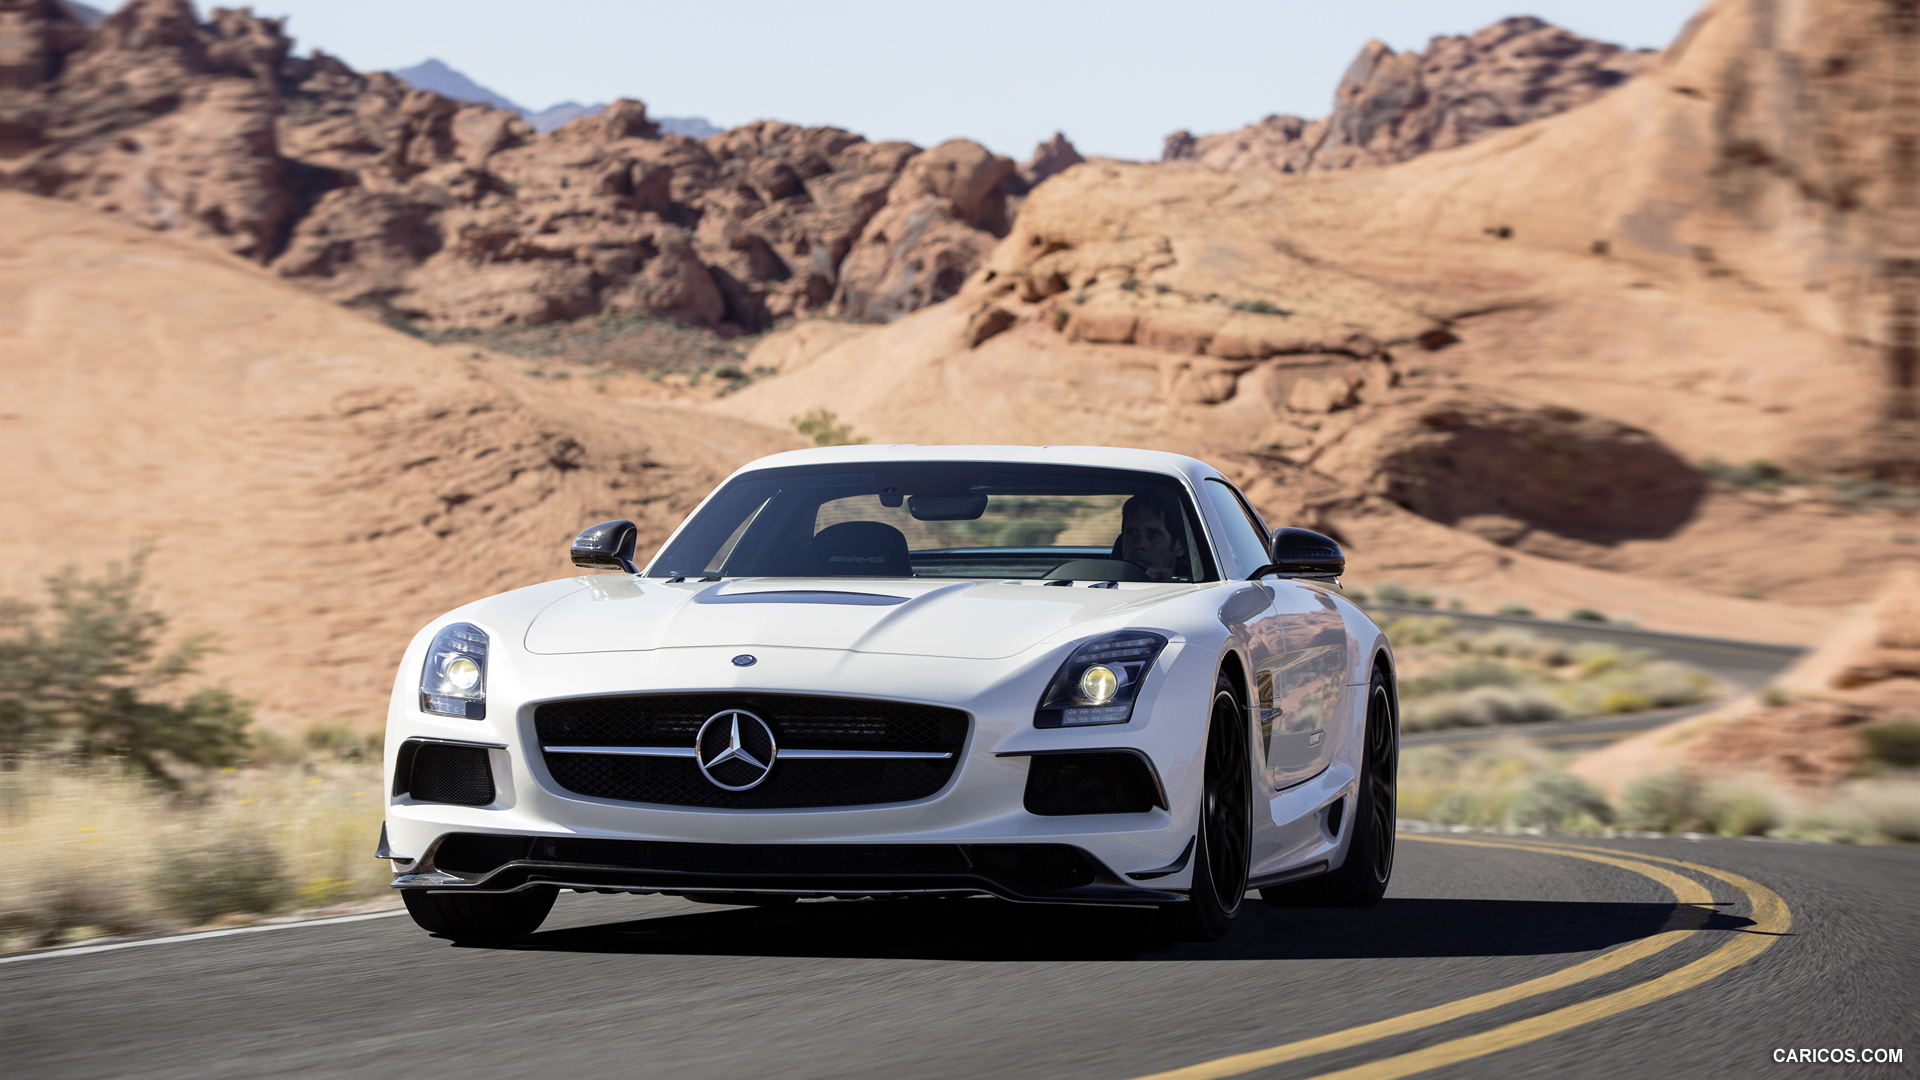 2014 Mercedes-Benz SLS AMG Coupe Black Series White - Front, #2 of 40